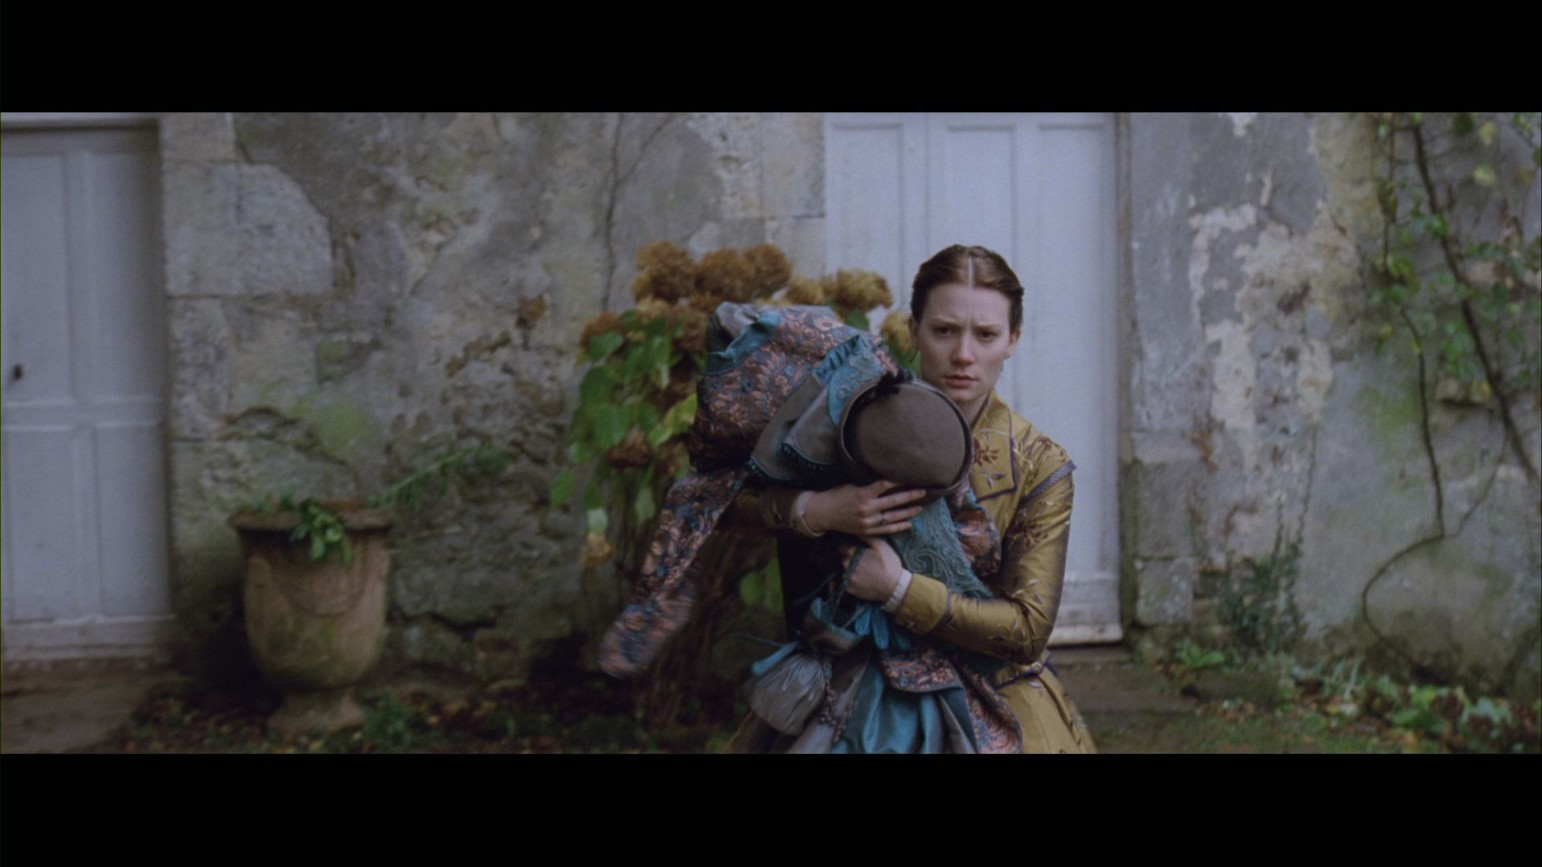 Amazing Madame Bovary (2015) Pictures & Backgrounds